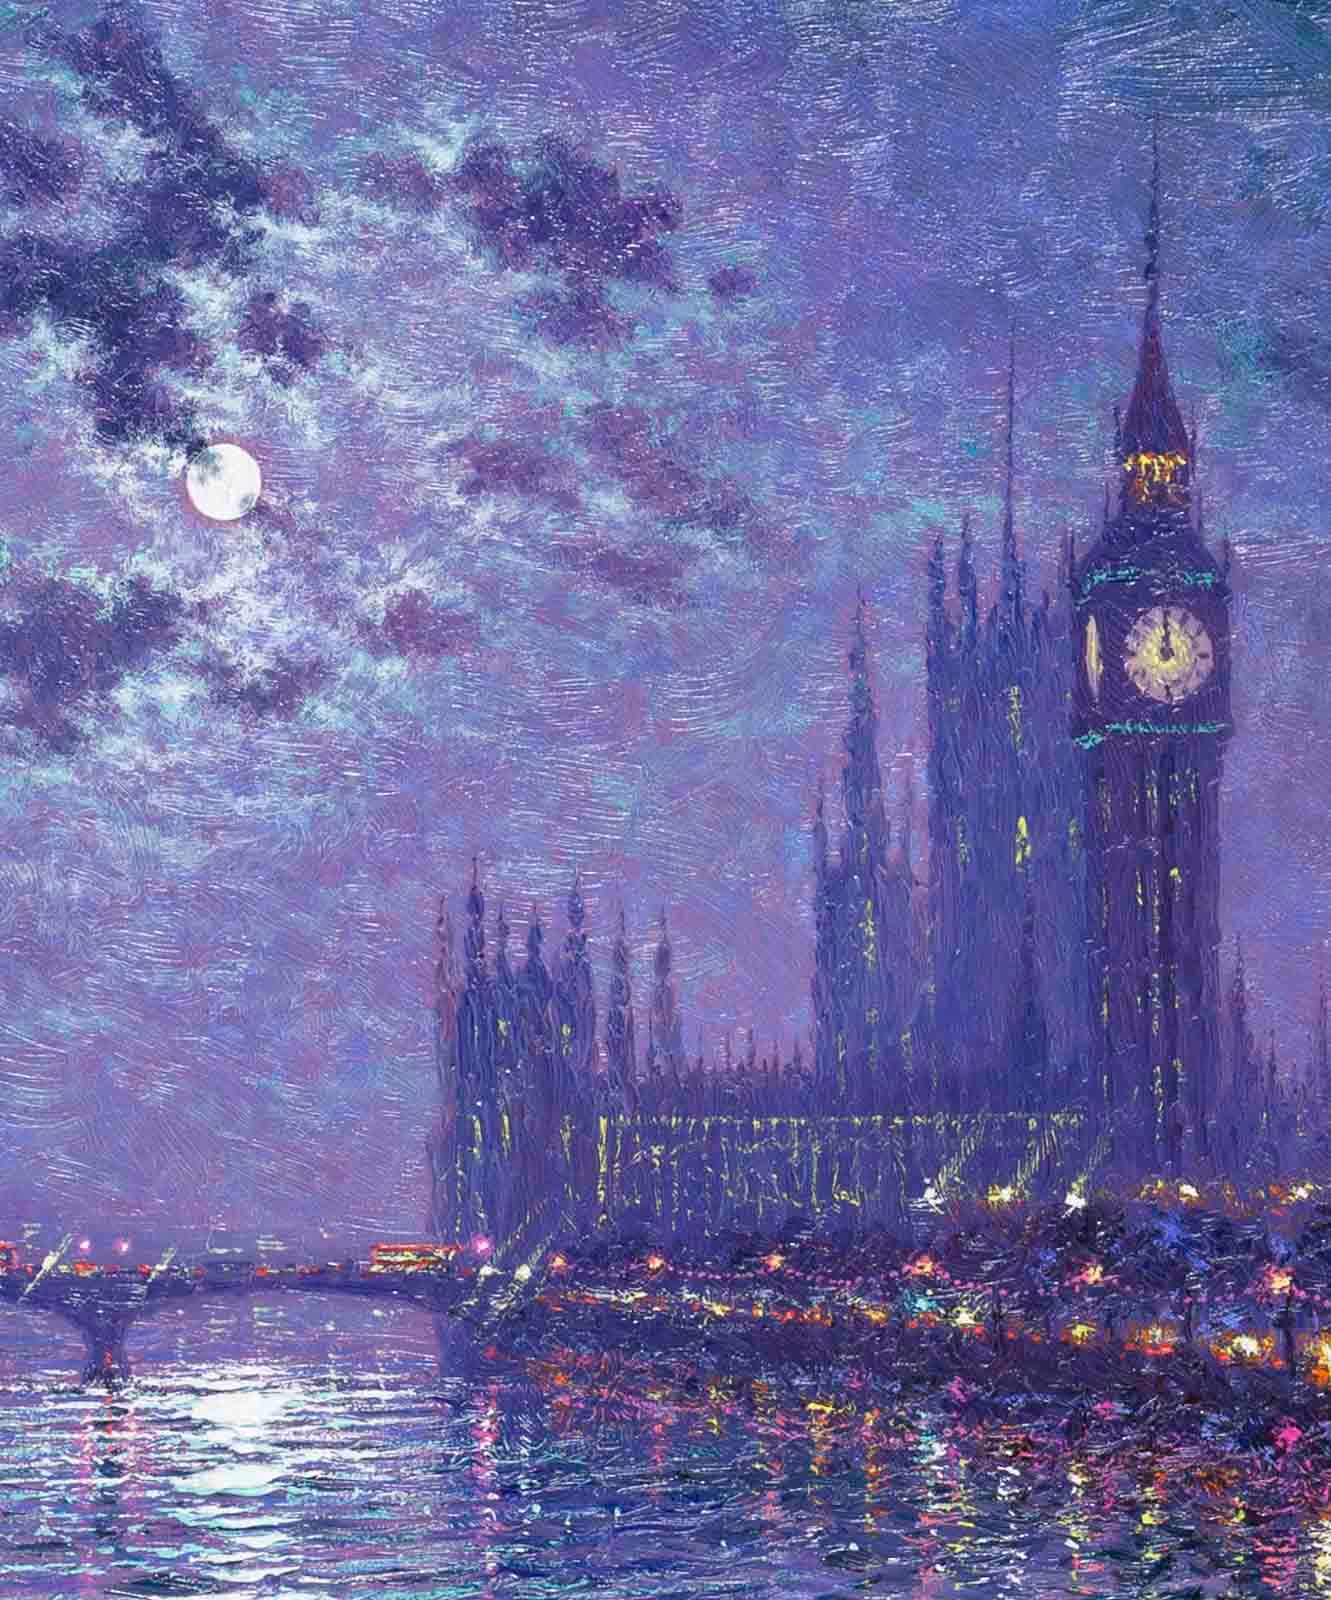 Westminster Chimes at Midnight, London